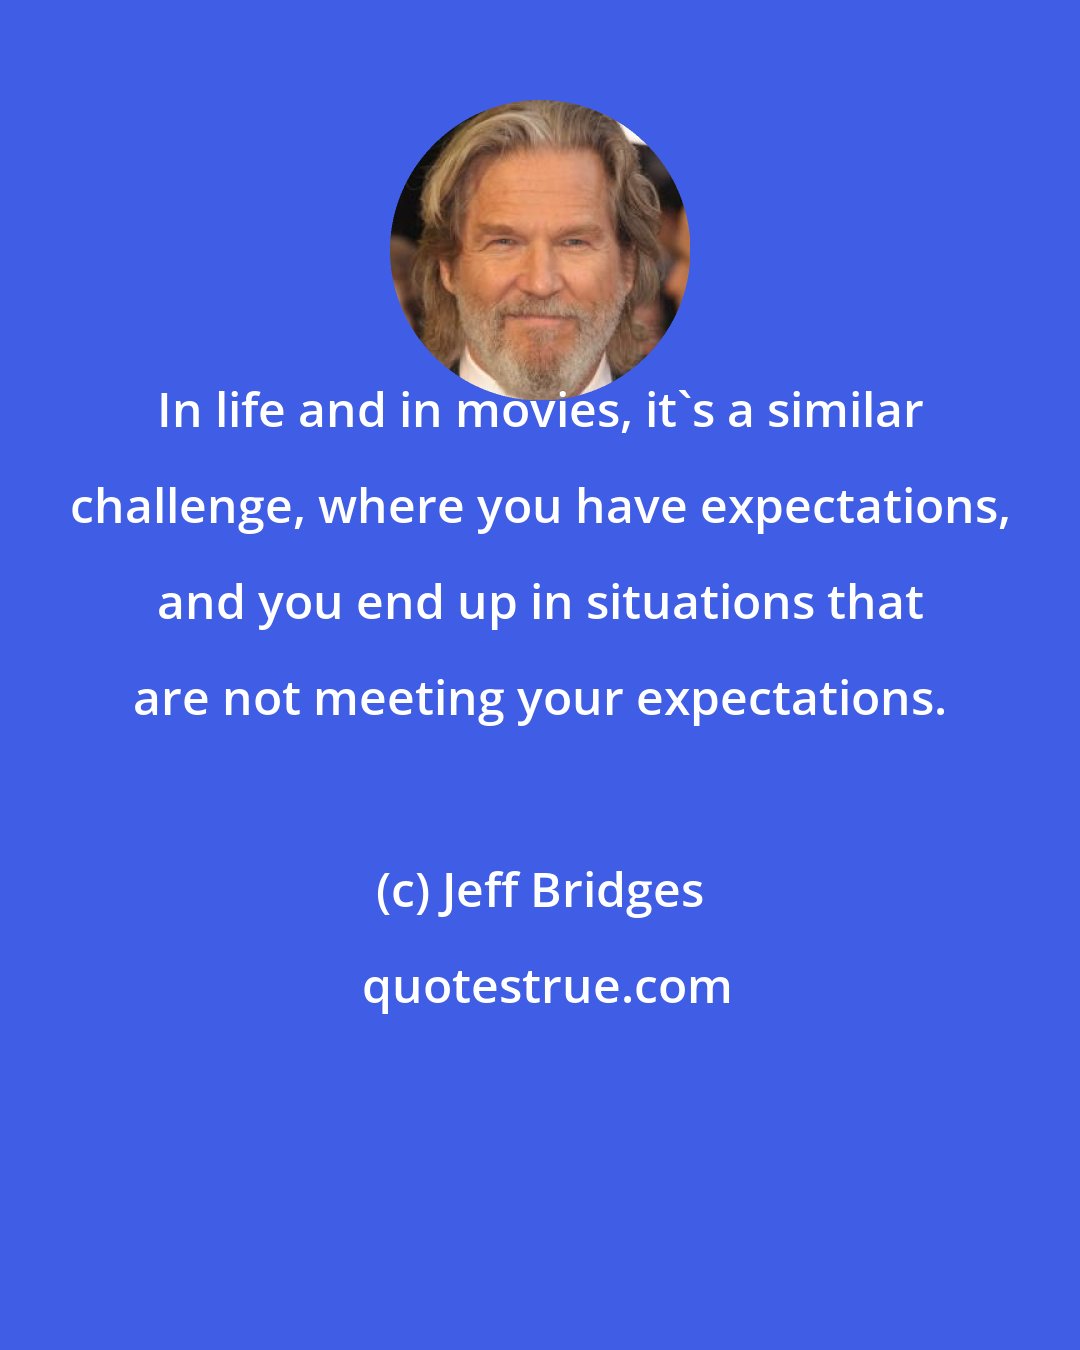 Jeff Bridges: In life and in movies, it's a similar challenge, where you have expectations, and you end up in situations that are not meeting your expectations.